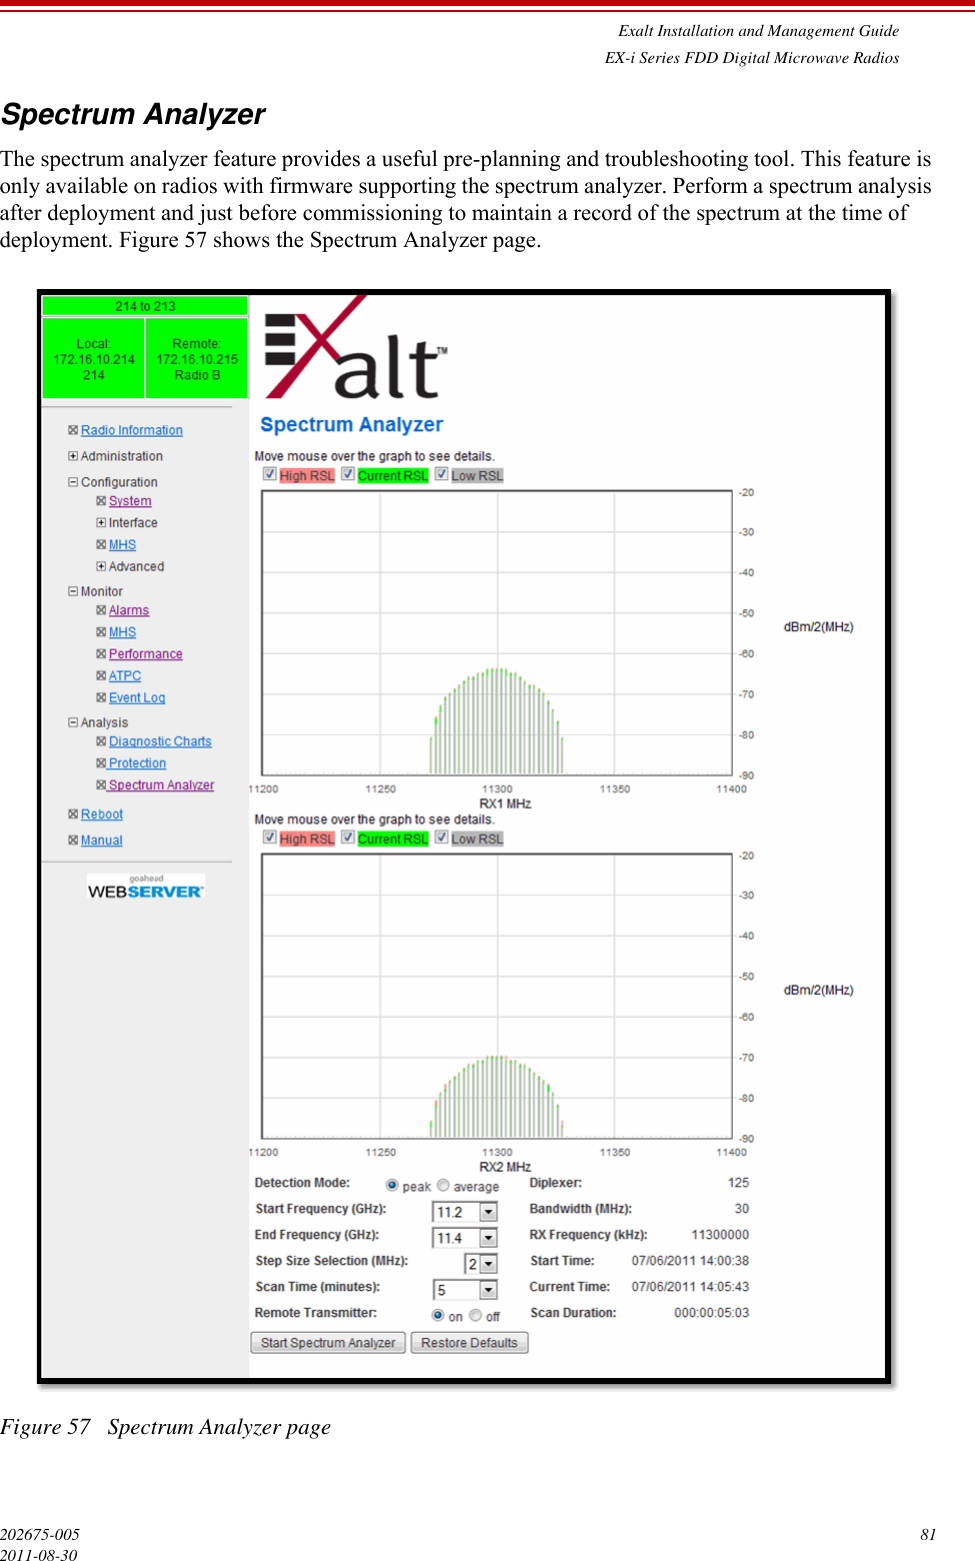 Exalt Installation and Management GuideEX-i Series FDD Digital Microwave Radios202675-005 812011-08-30Spectrum AnalyzerThe spectrum analyzer feature provides a useful pre-planning and troubleshooting tool. This feature is only available on radios with firmware supporting the spectrum analyzer. Perform a spectrum analysis after deployment and just before commissioning to maintain a record of the spectrum at the time of deployment. Figure 57 shows the Spectrum Analyzer page.Figure 57   Spectrum Analyzer page